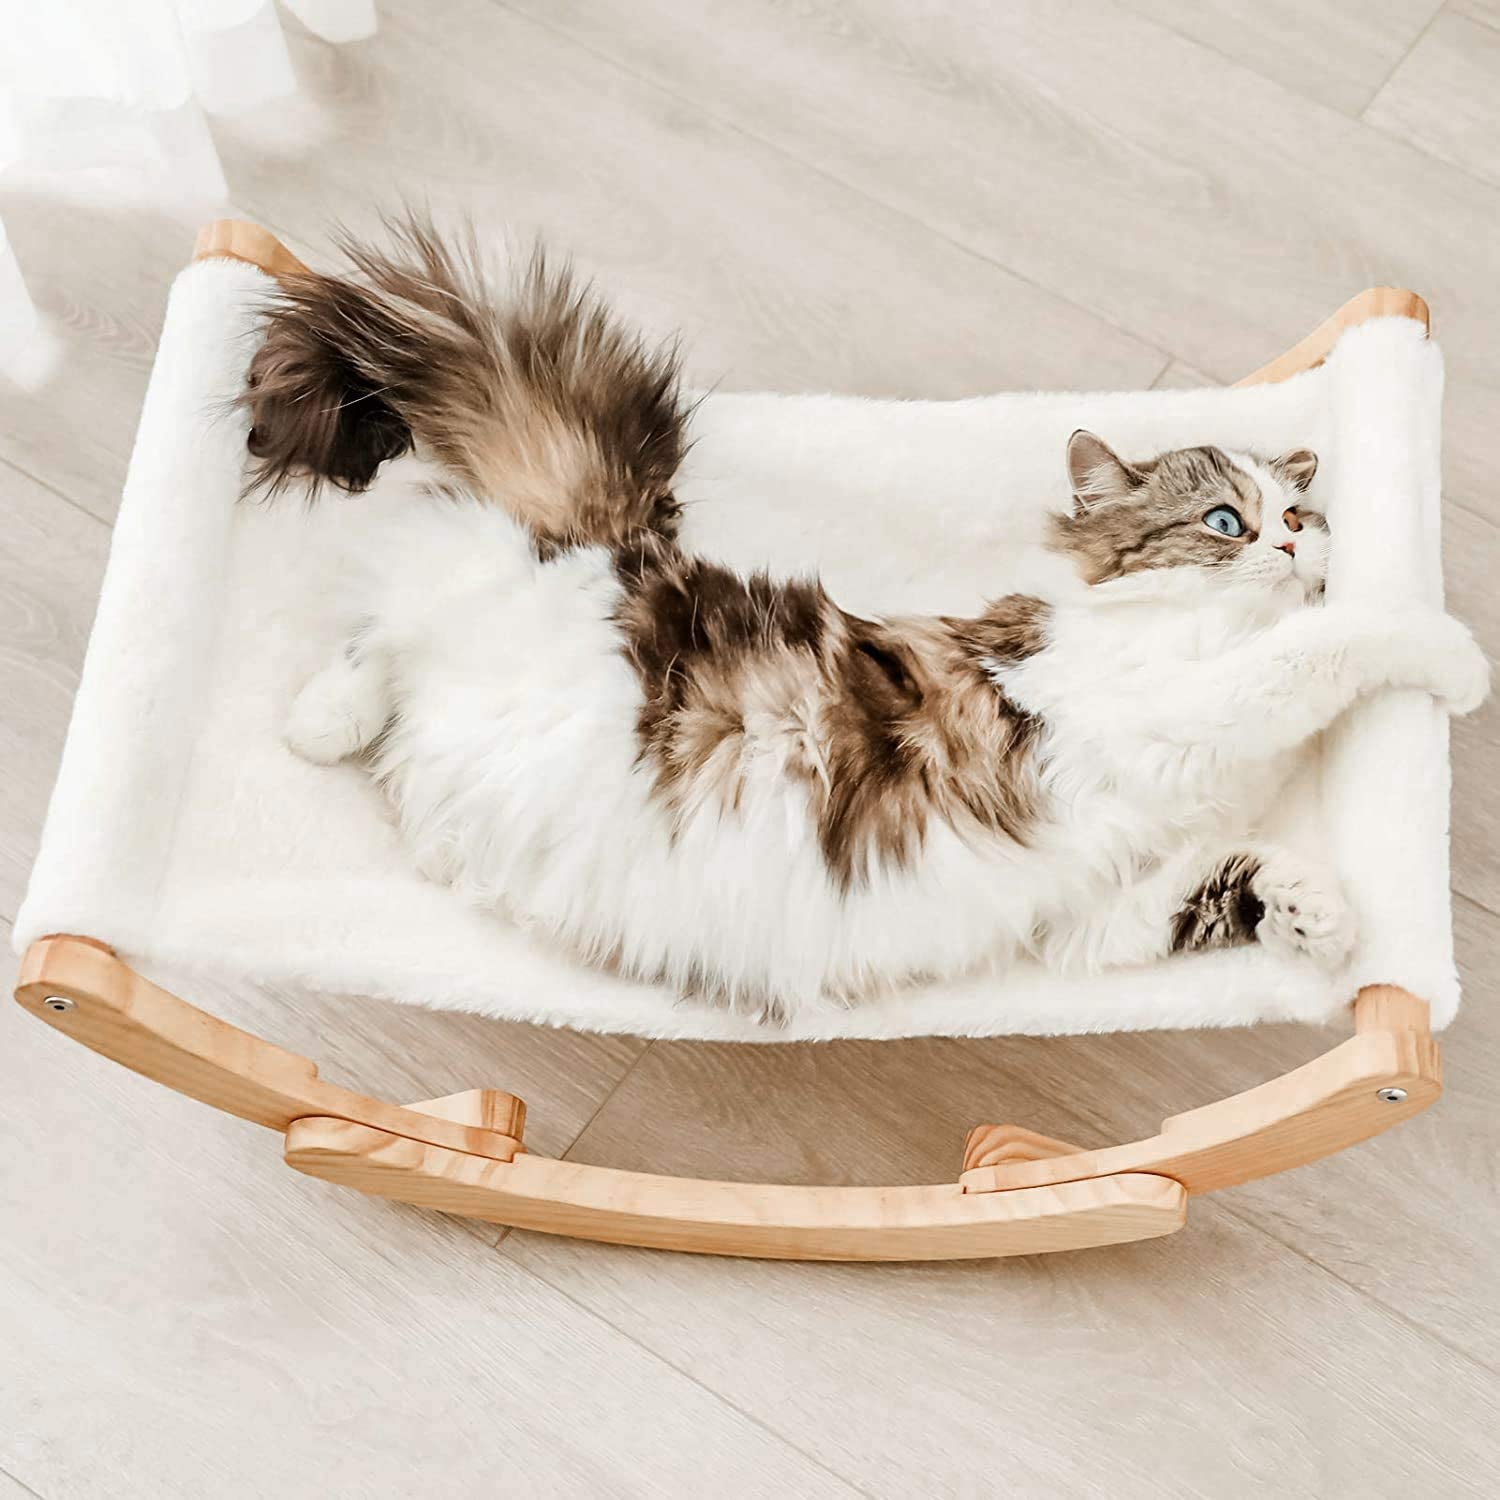 Cat Hammock, New Moon Cat Swing Chair, Elevated Cat Bed for Indoor Cats, Cat Furniture Gift for Cat or Small Dog, Upgrade White